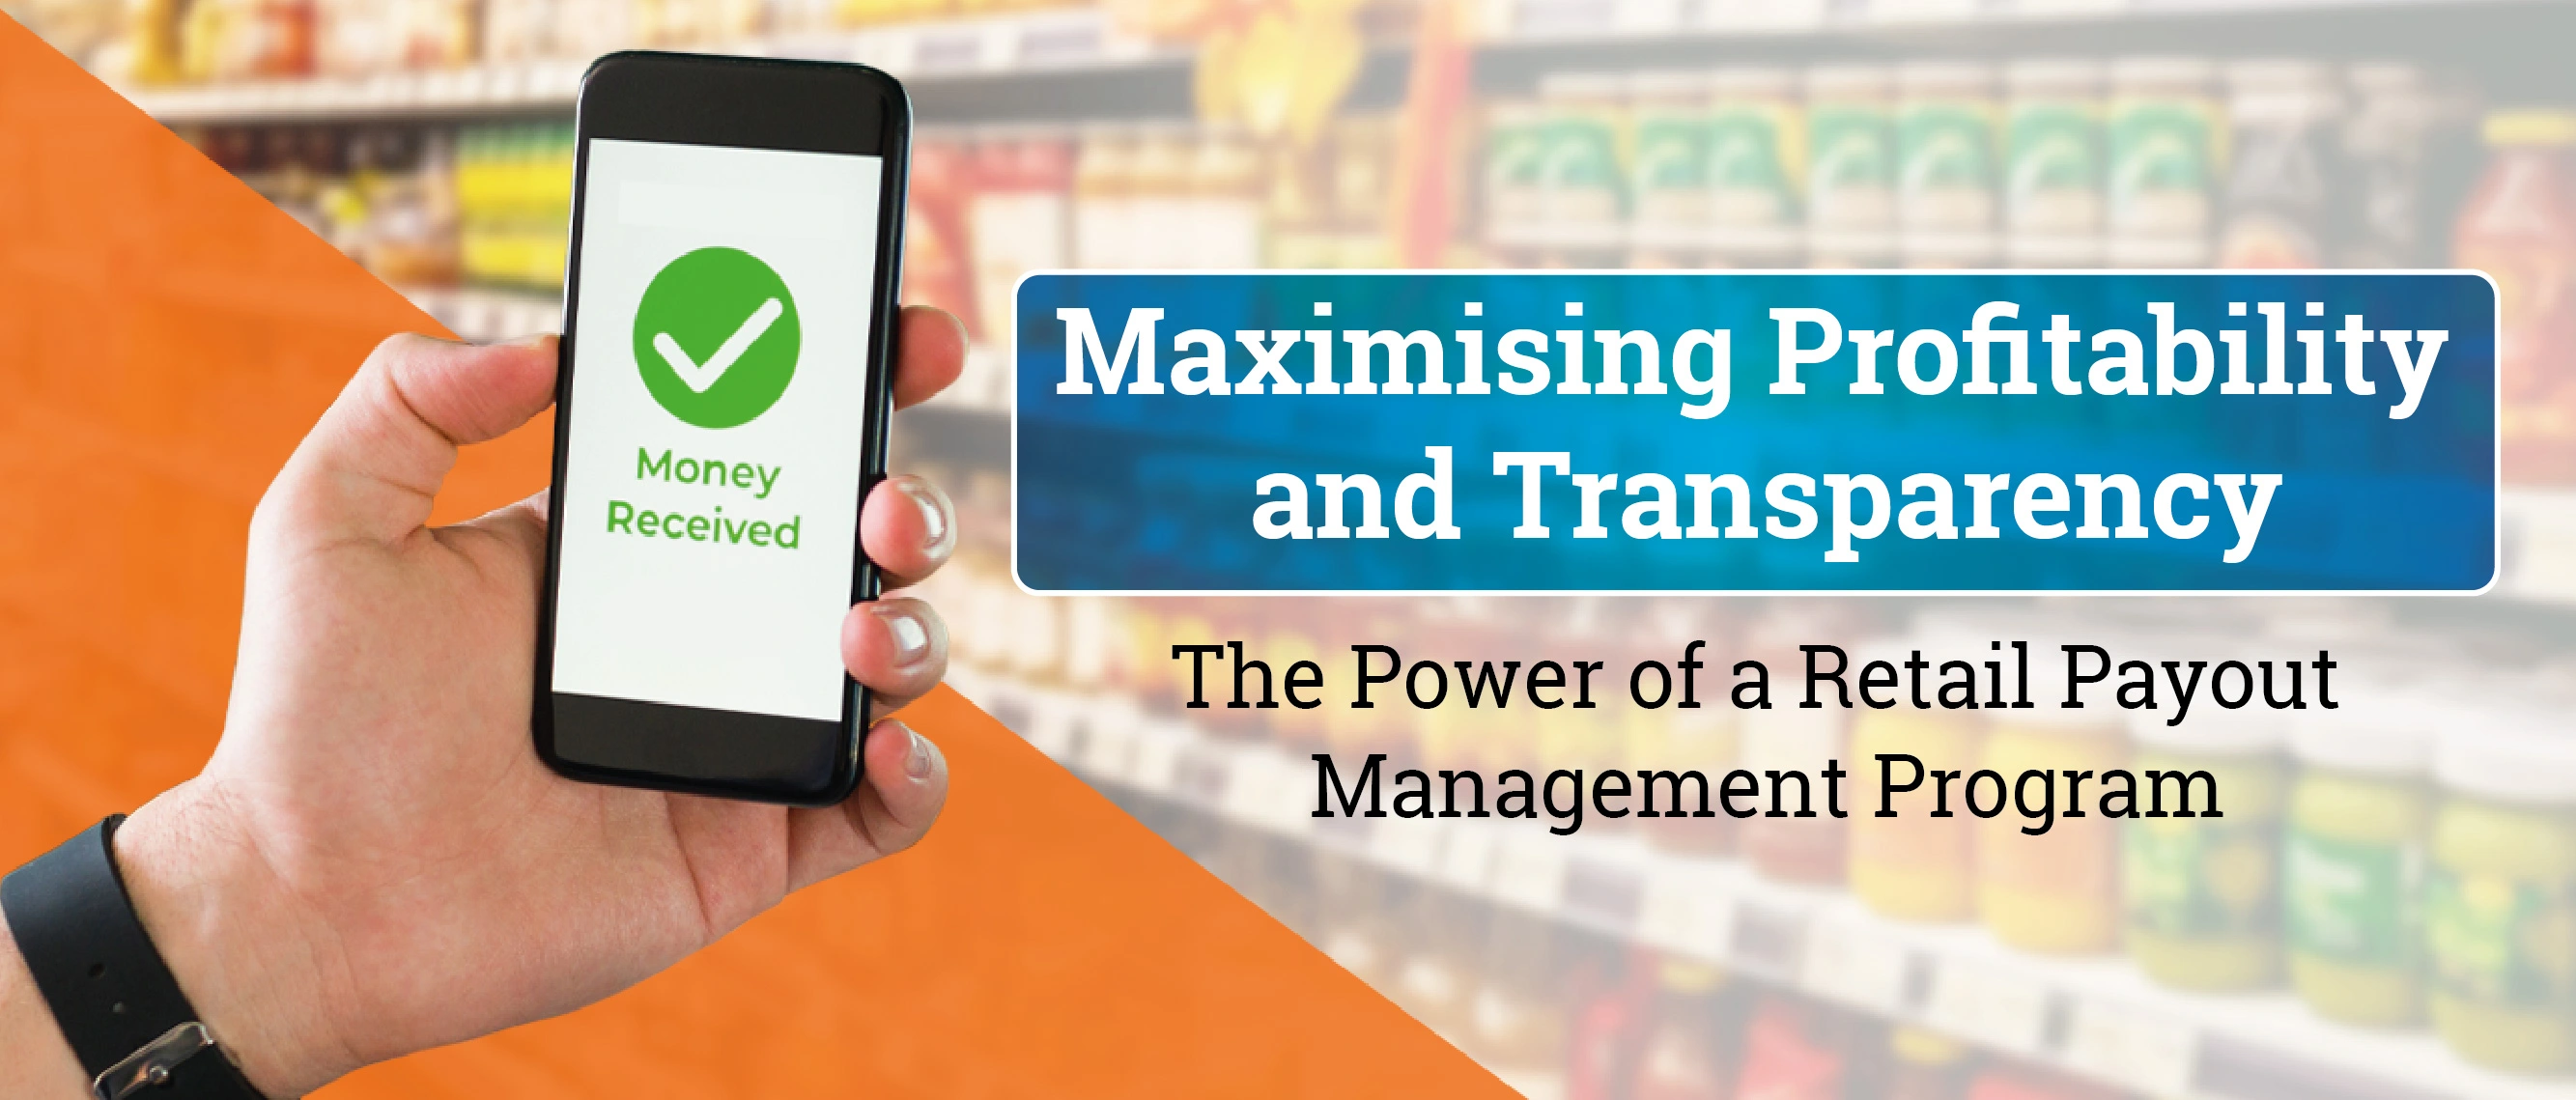 Maximising Profitability and Transparency: The Power of a Retail Payout Management Program